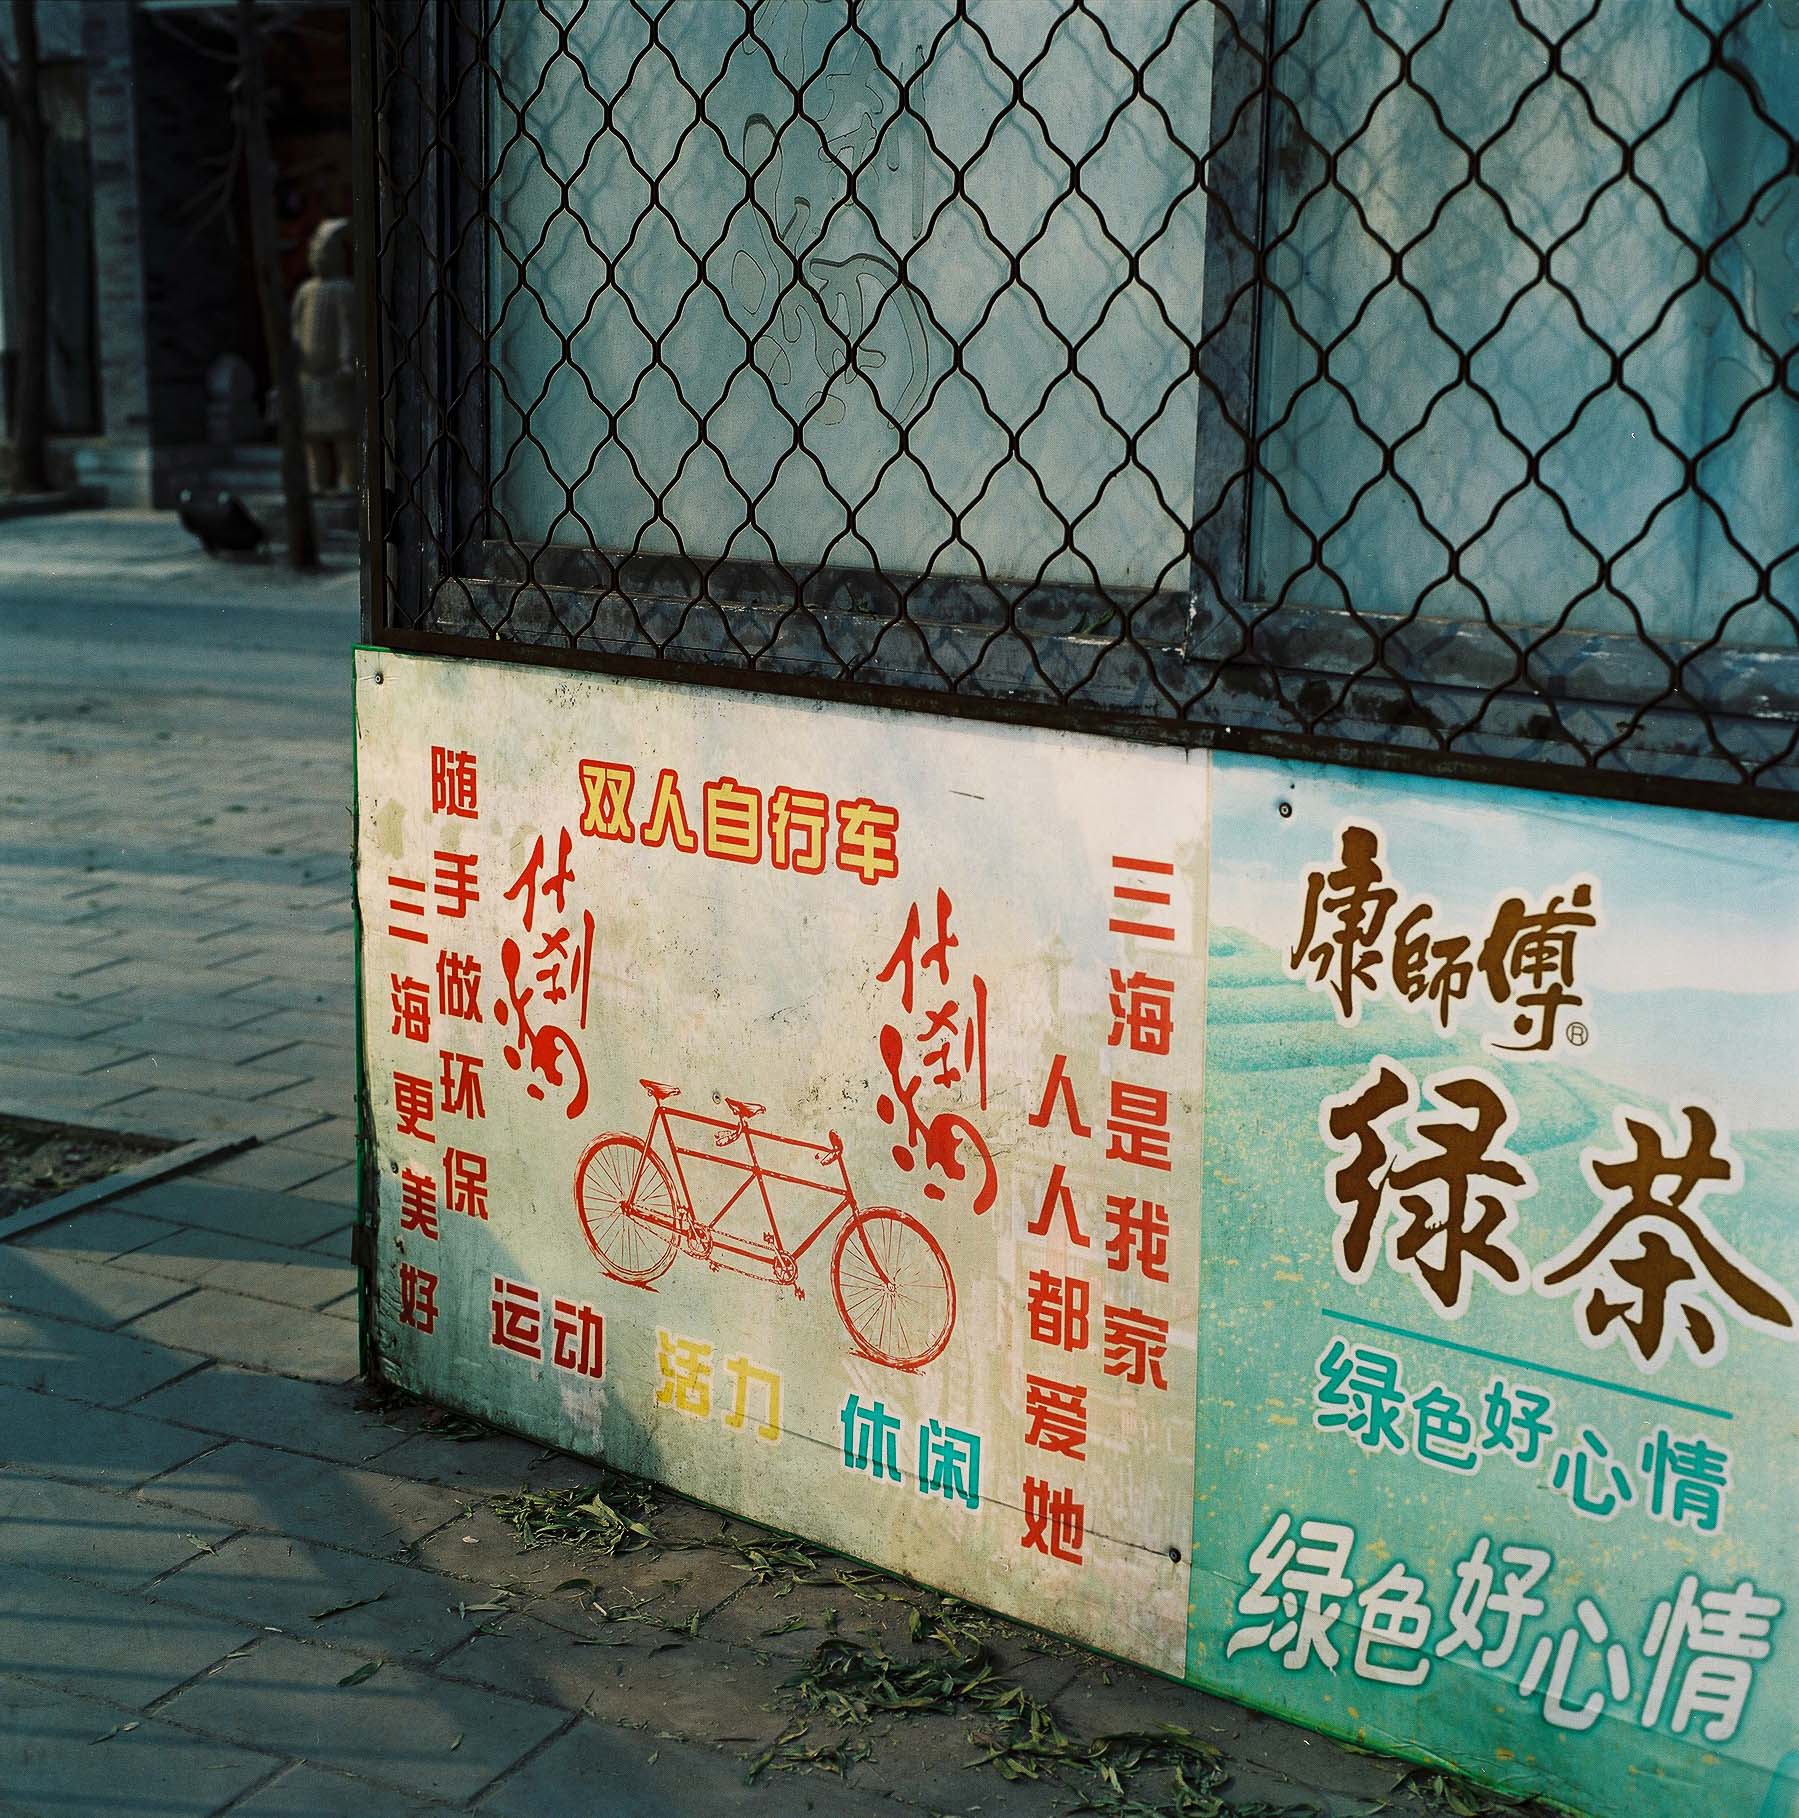 A bicycle sign written in red on a street corner in China.